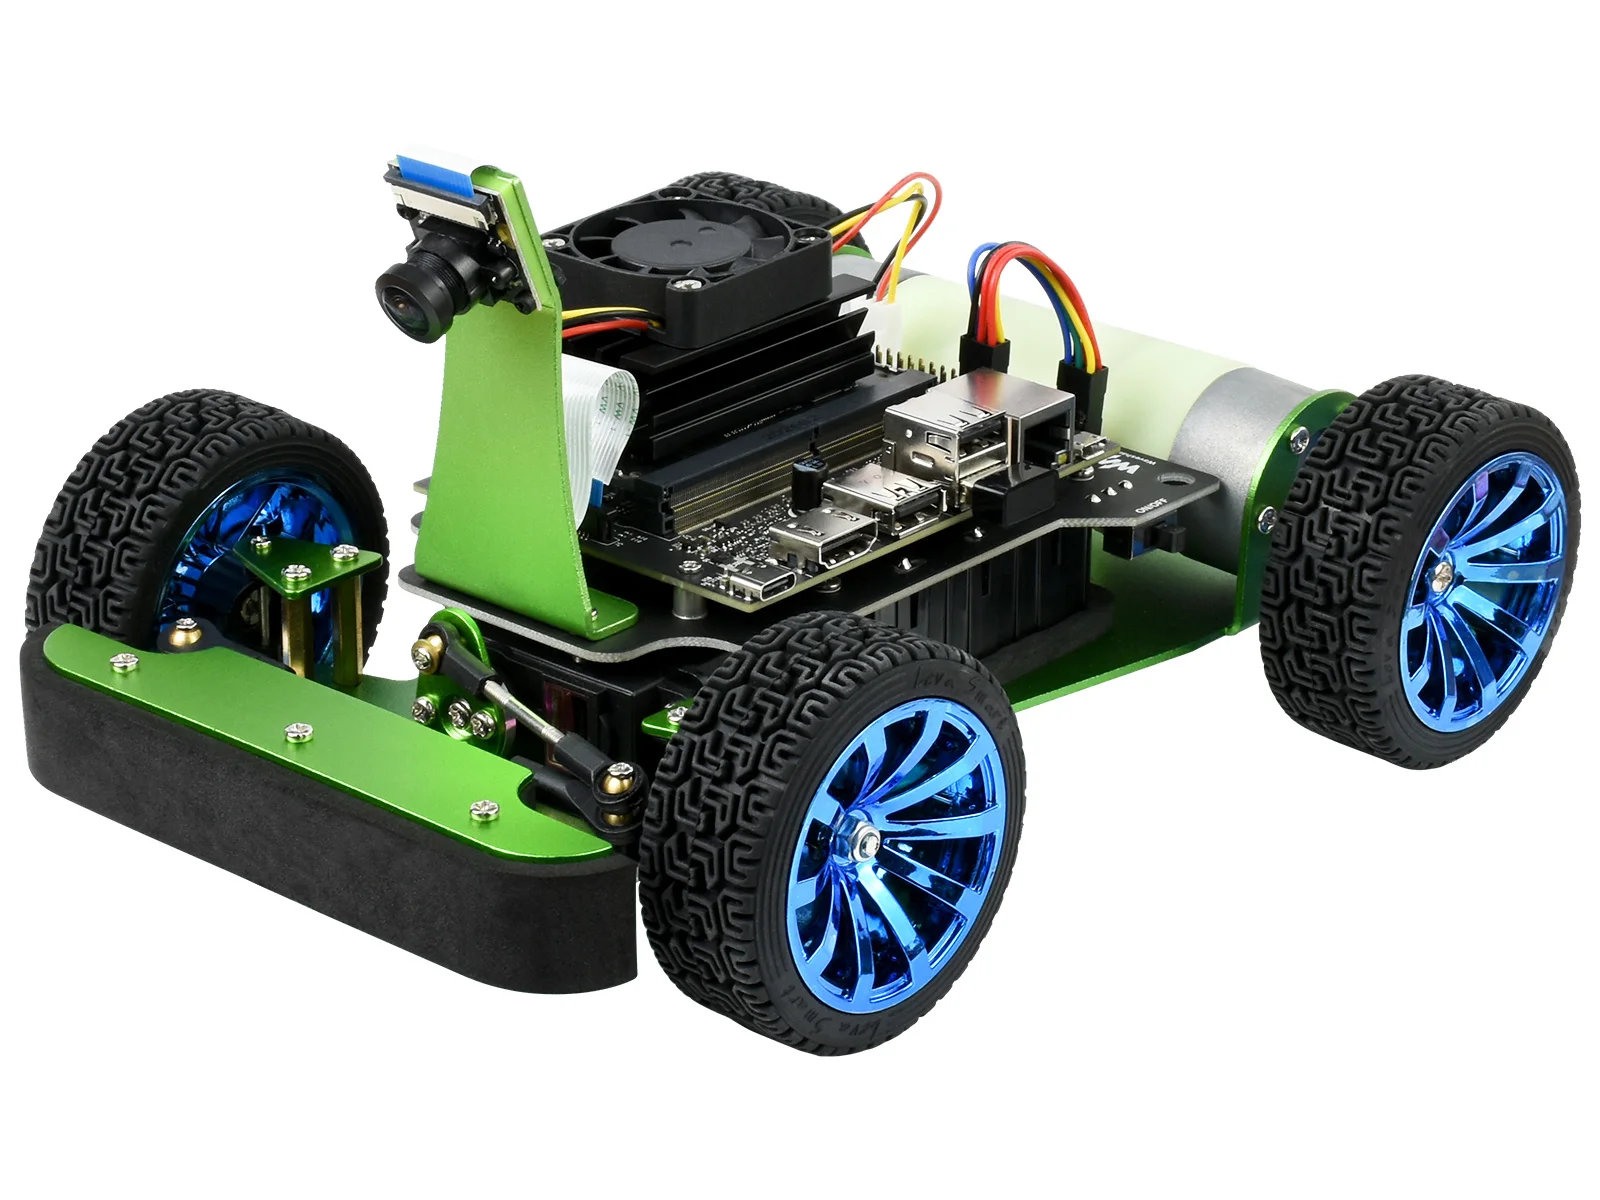 

DonKeyCar JetRacer 2GB AI Kit/Acce,AI Racing Robot Powered by Jetson Nano 2GB(Optional),Suitable For High School AI Teaching